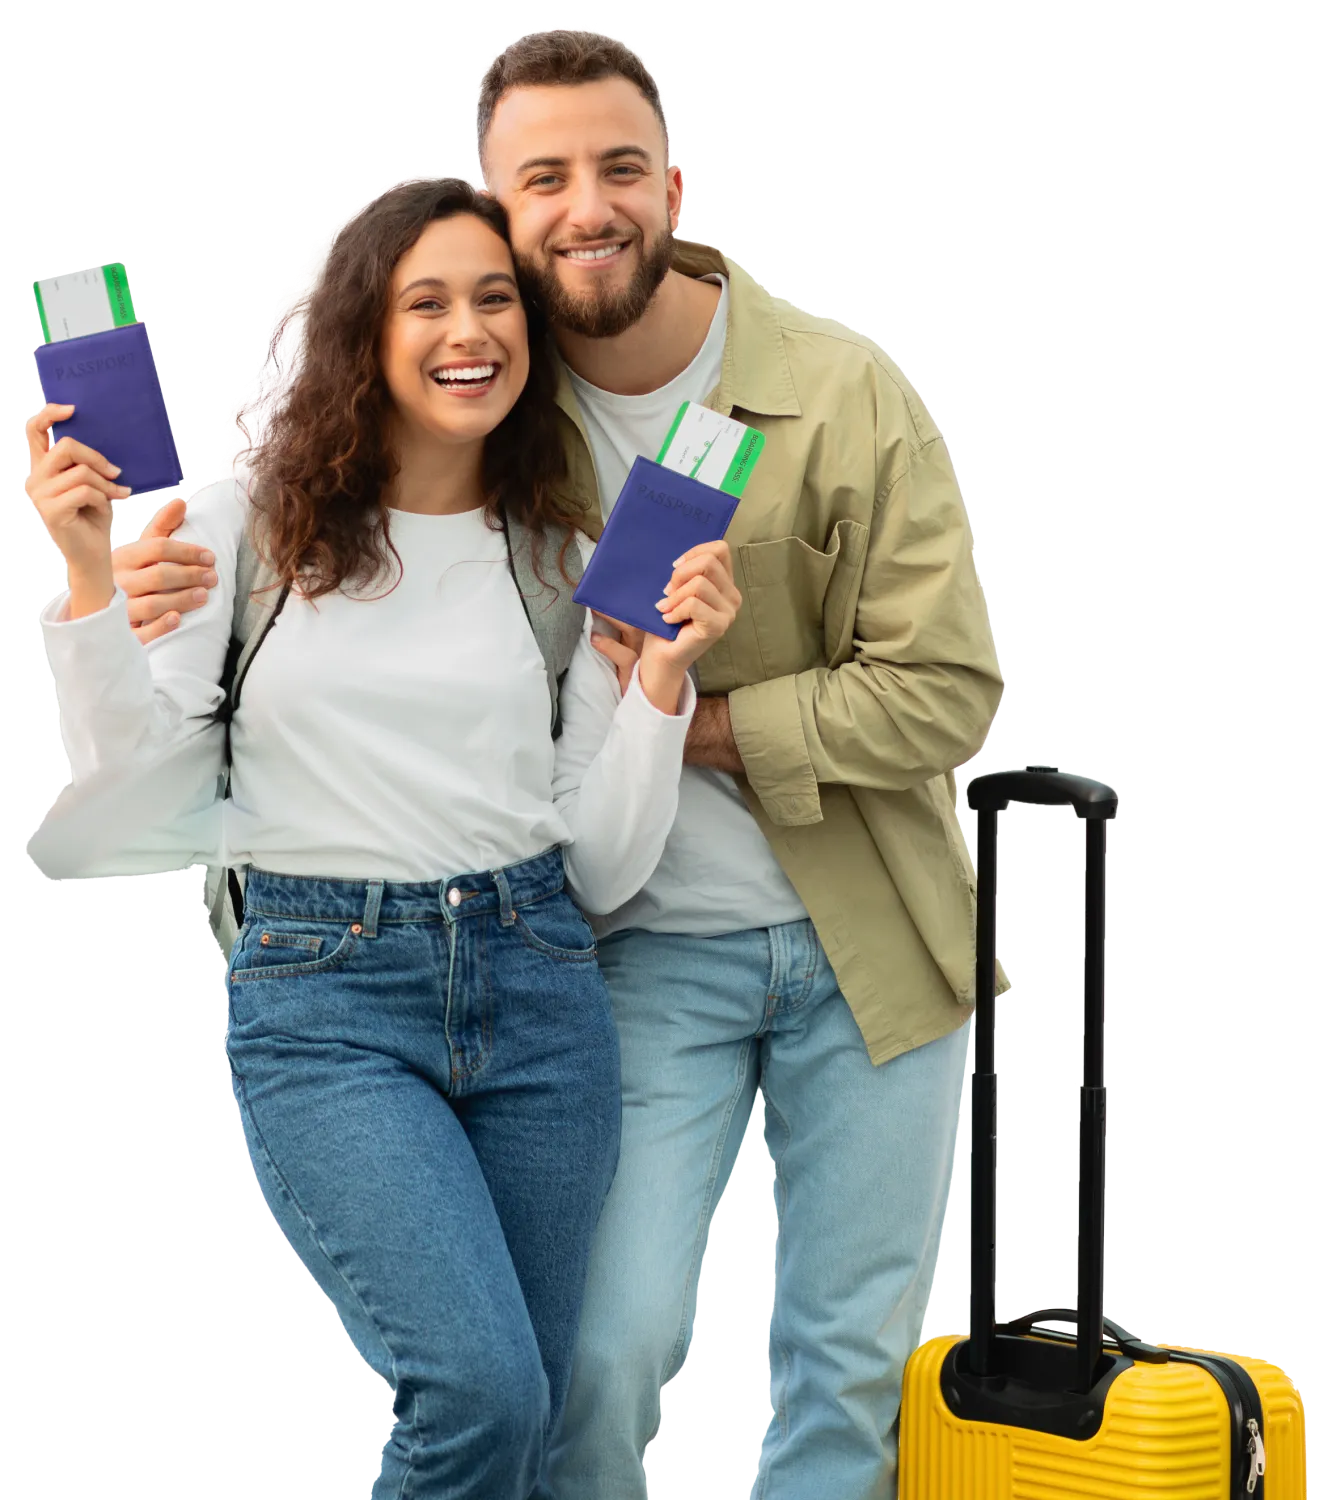 Couple with yellow luggage holding passports